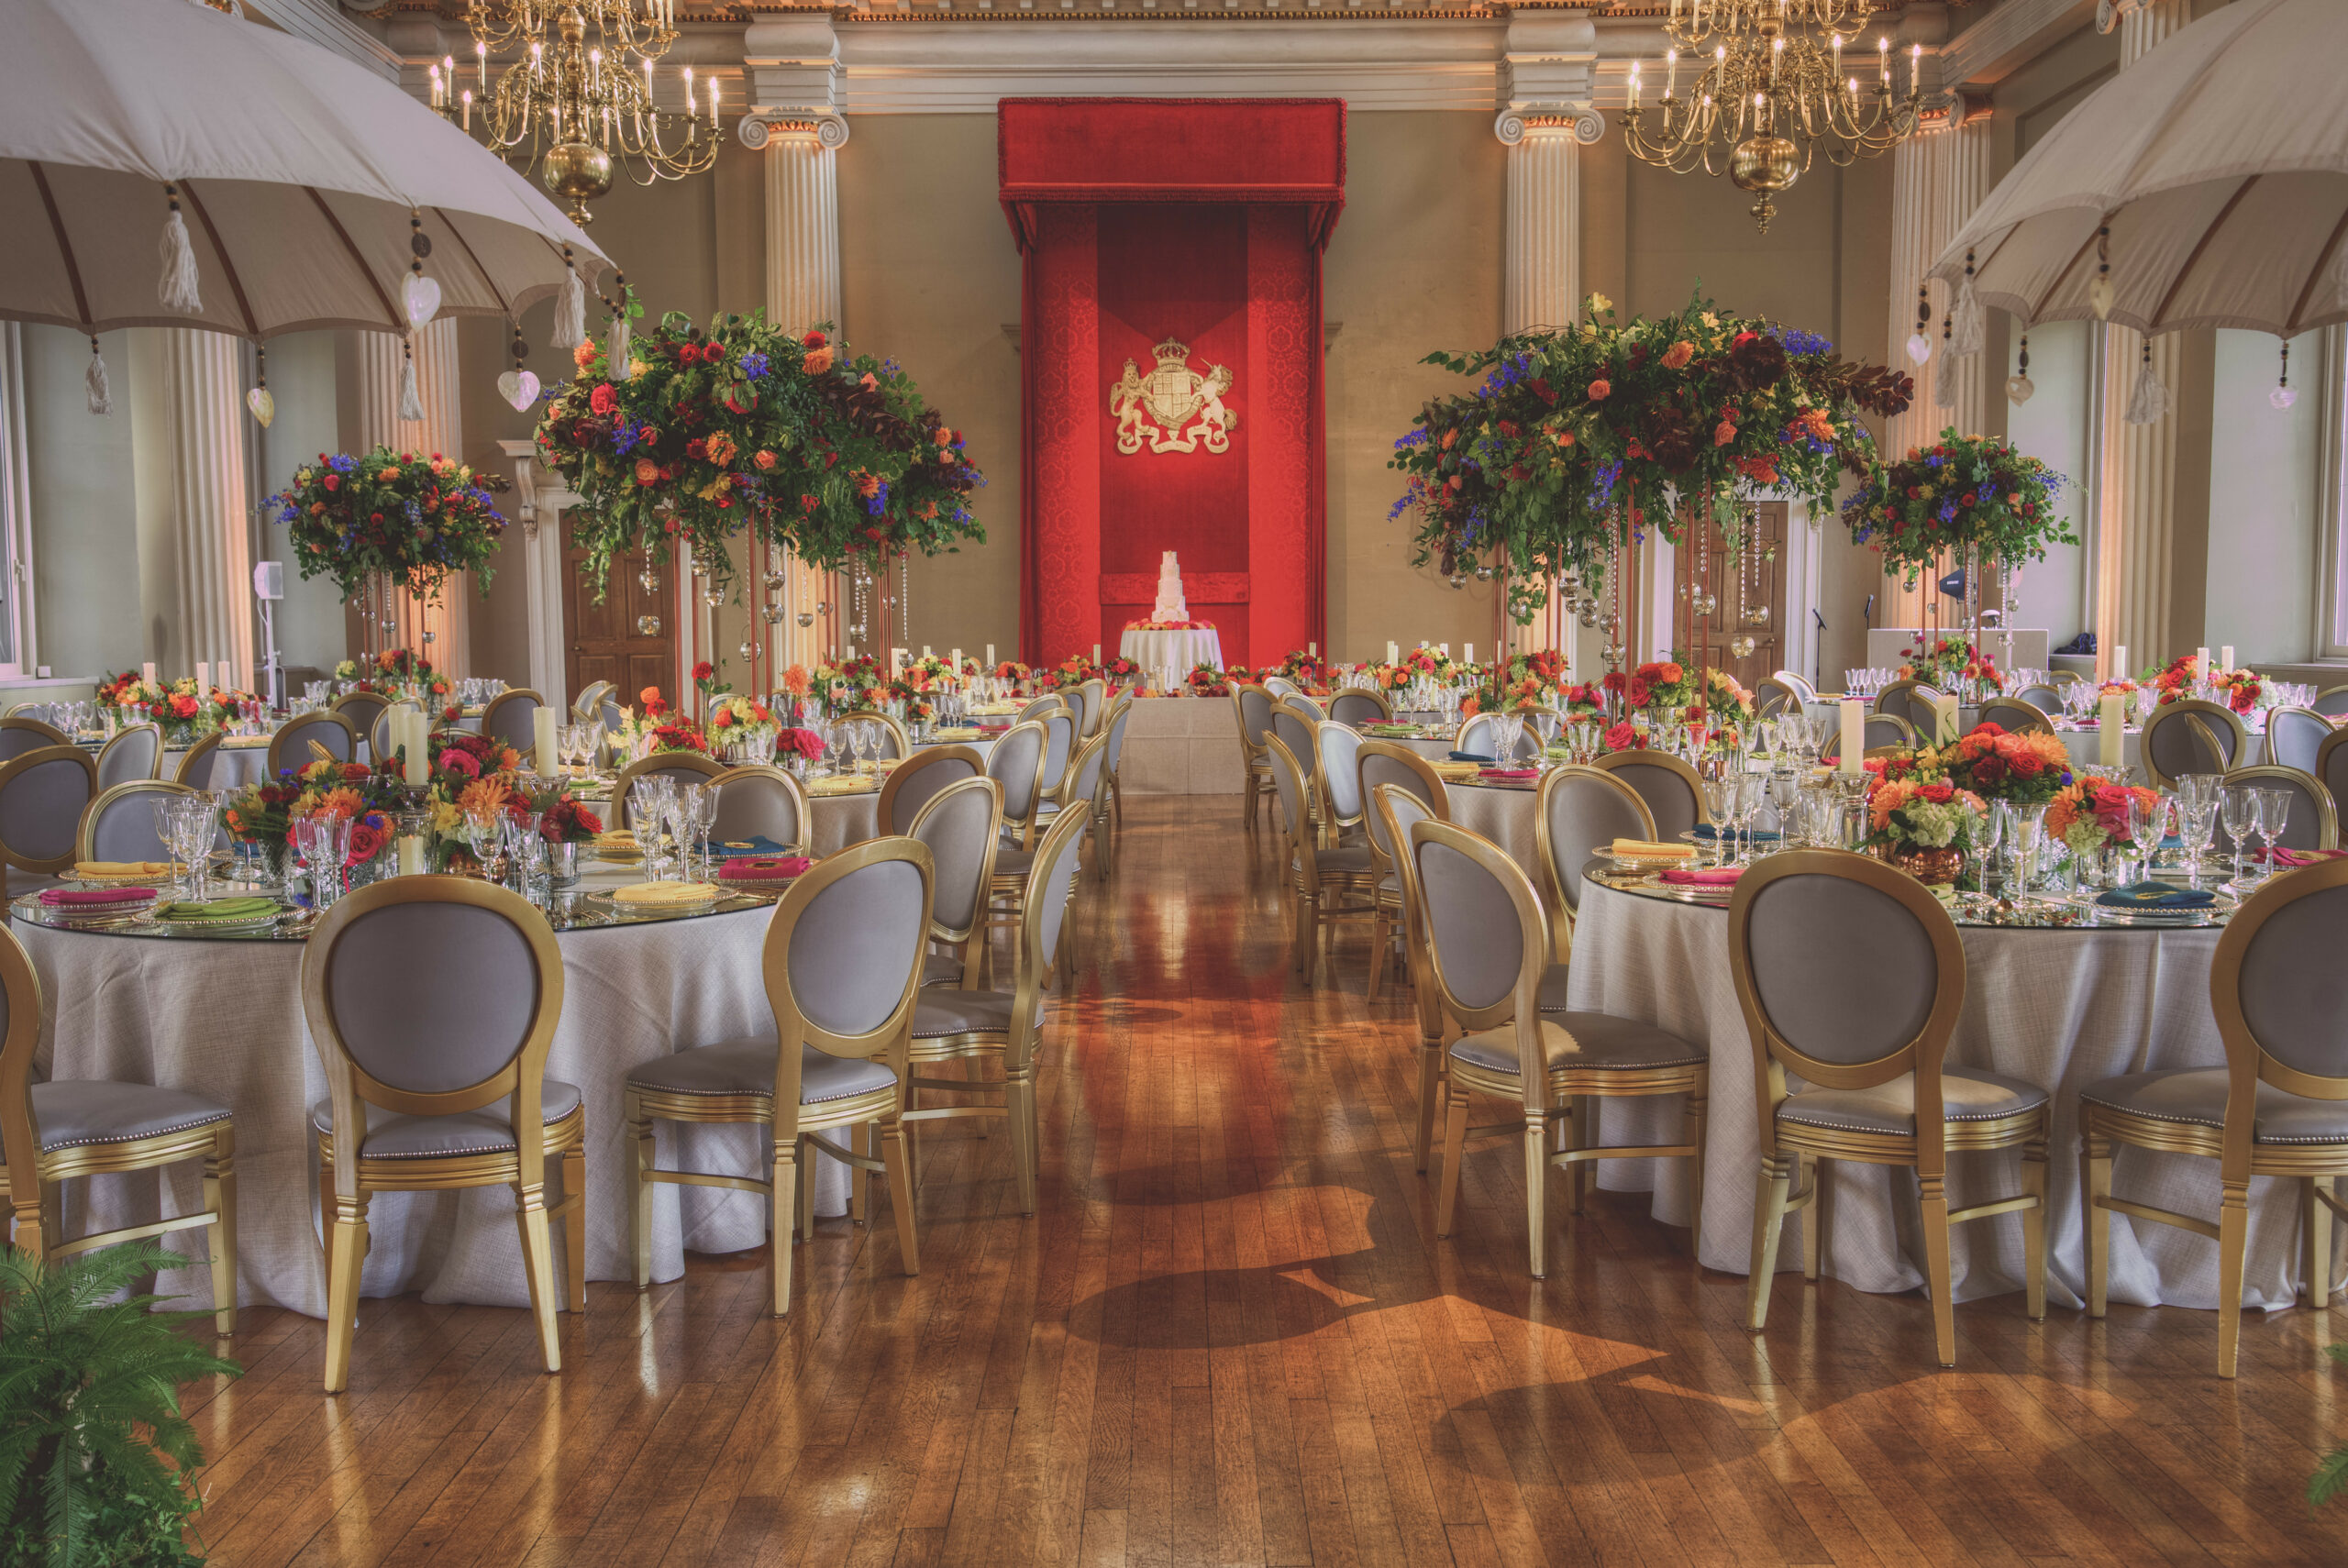 Historic Royal Palaces Banqueting House with By Yevnig luxury wedding cake